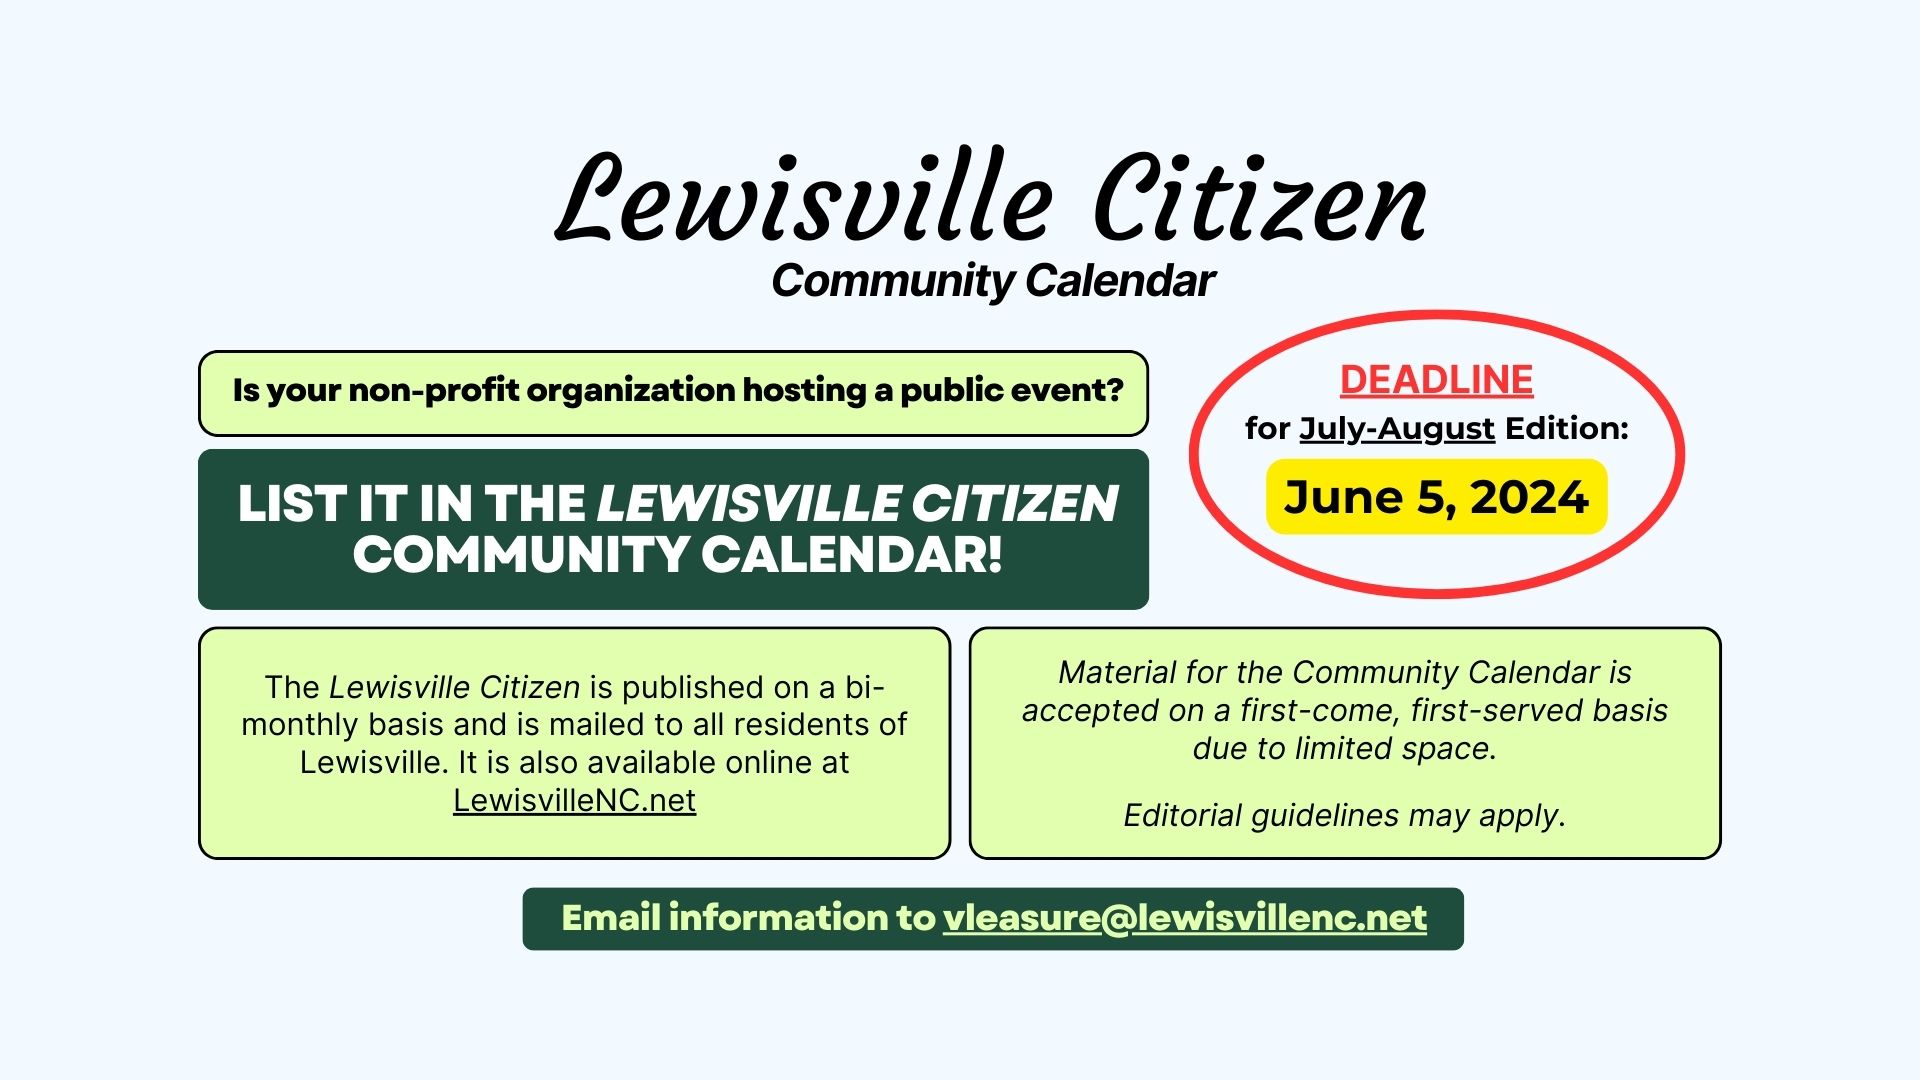 Community Calendar deadline for the July and August edition is June 5, 2024